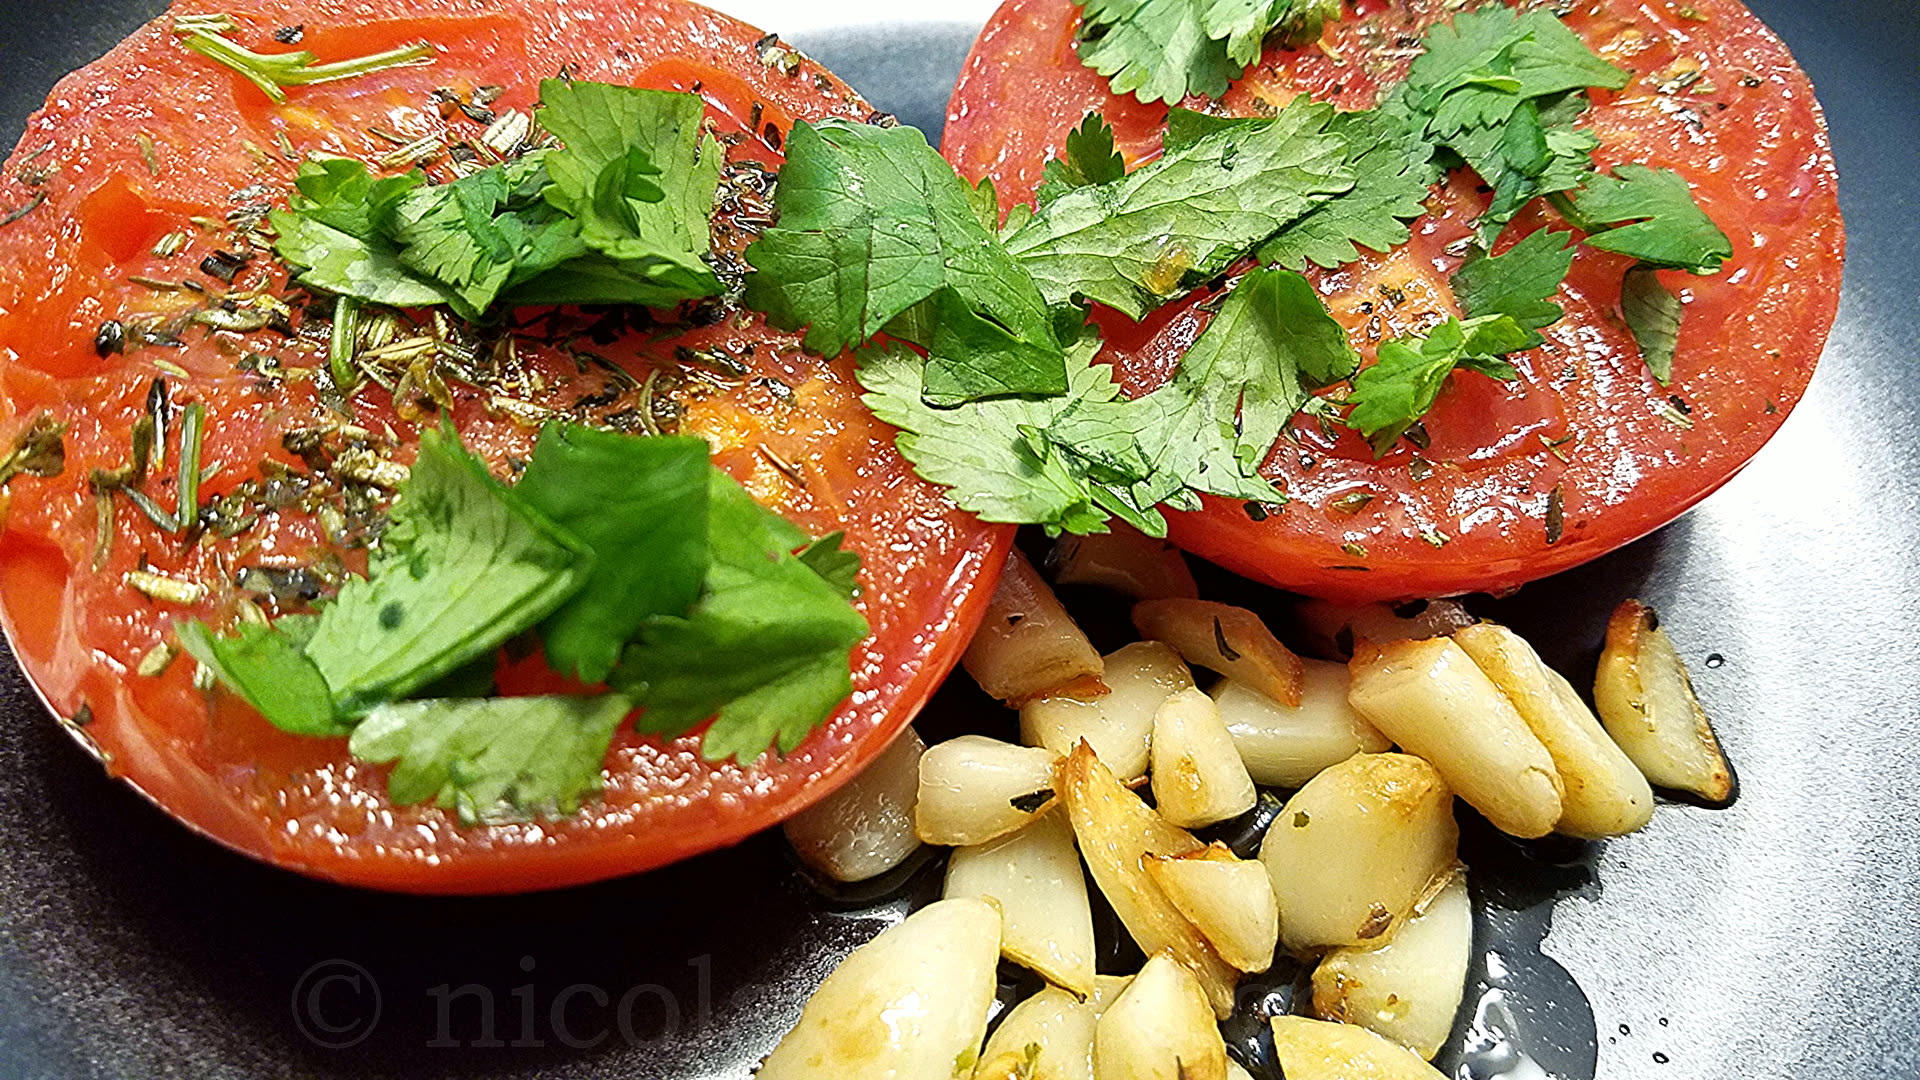 Tomates à la provençale: seared tomatoes with herbs and garlic